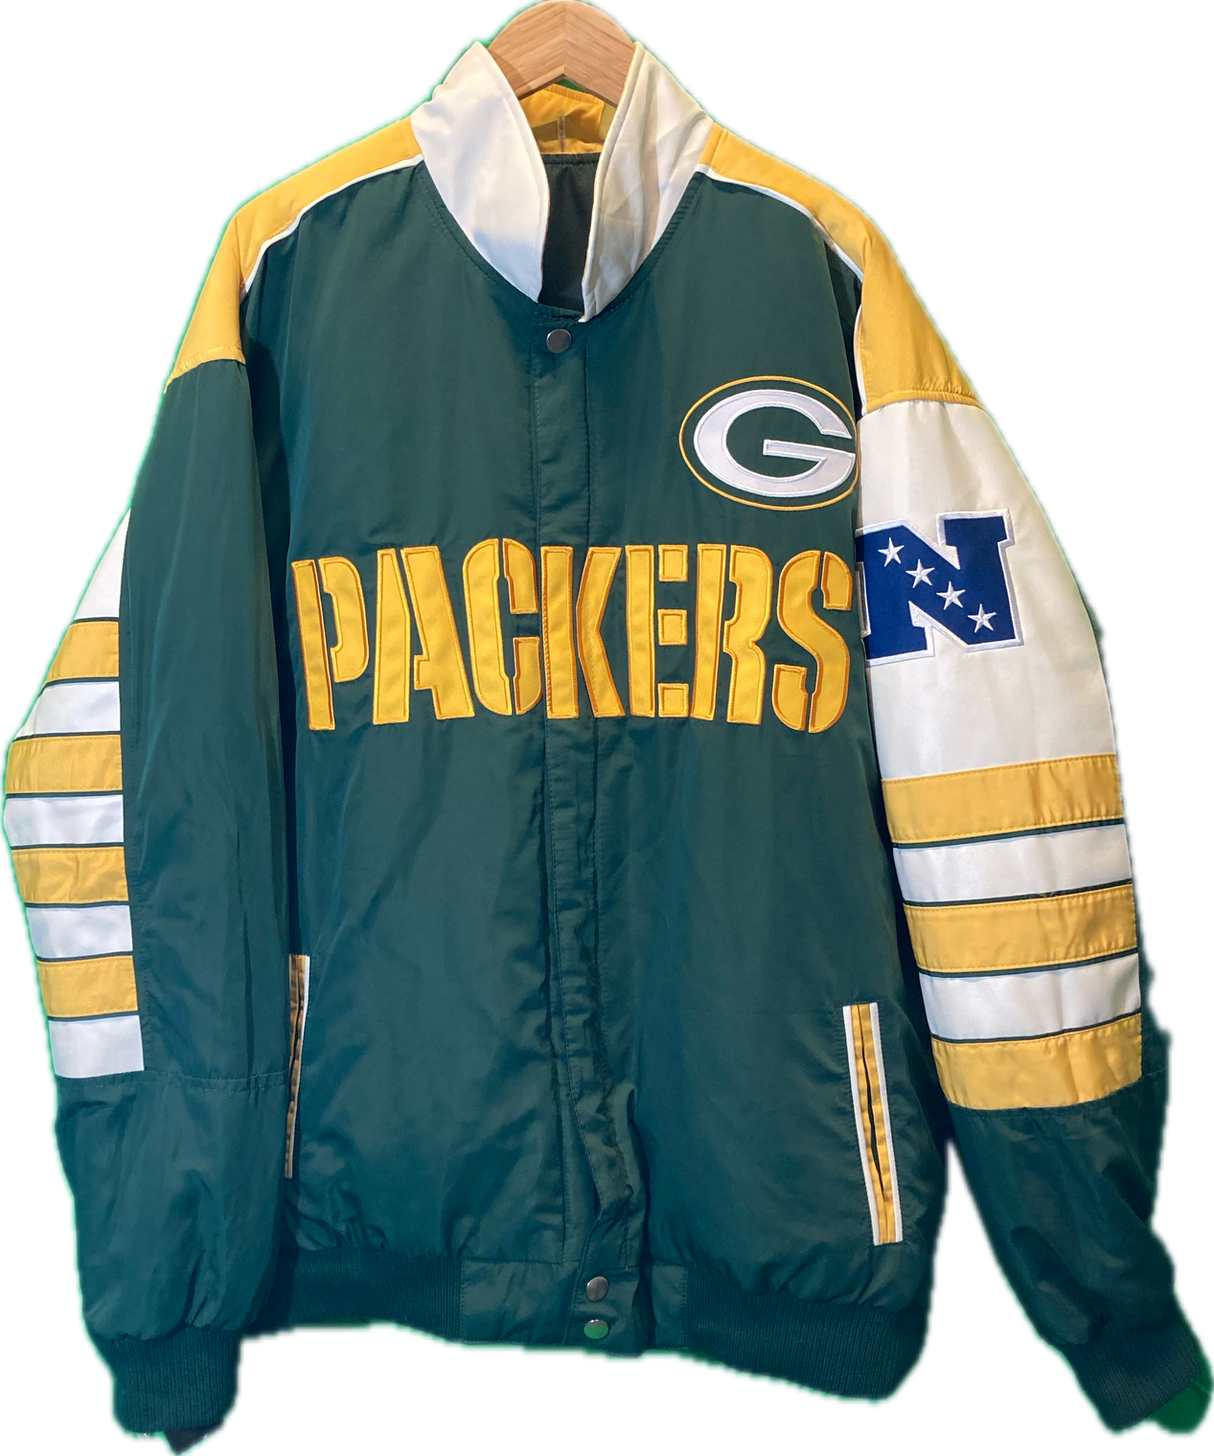 Packers JH Jacket